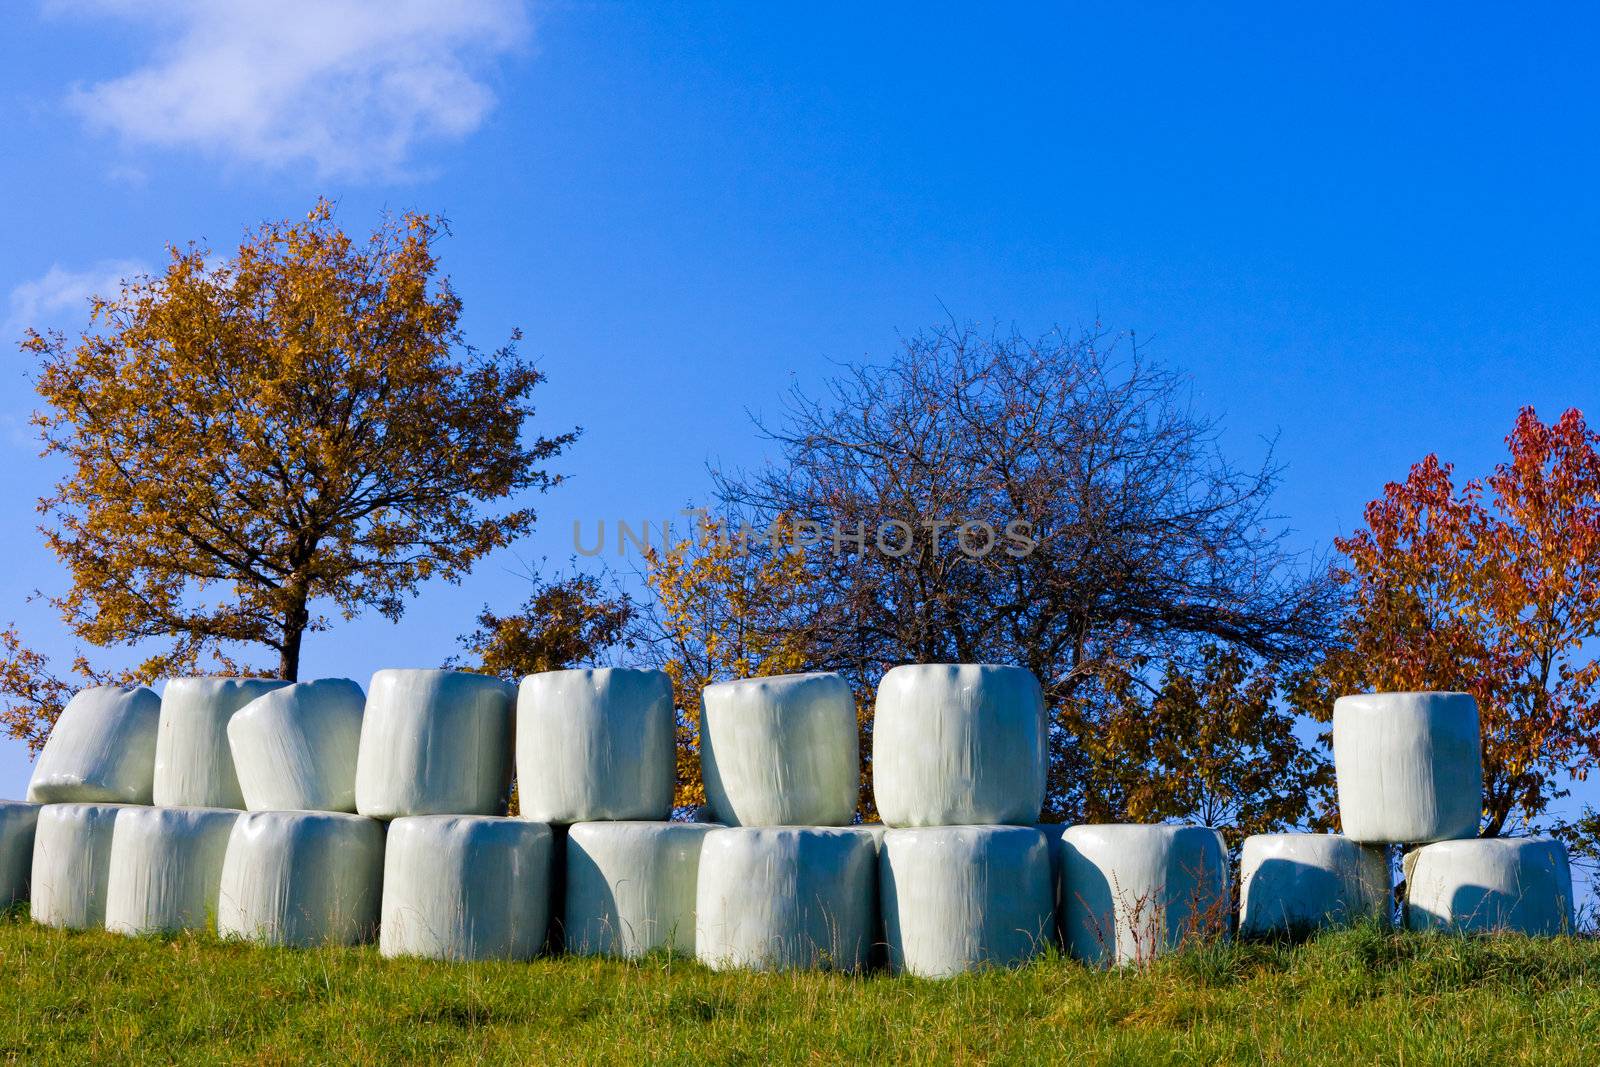 Haylage bales left outdoors for fermentation. by PiLens